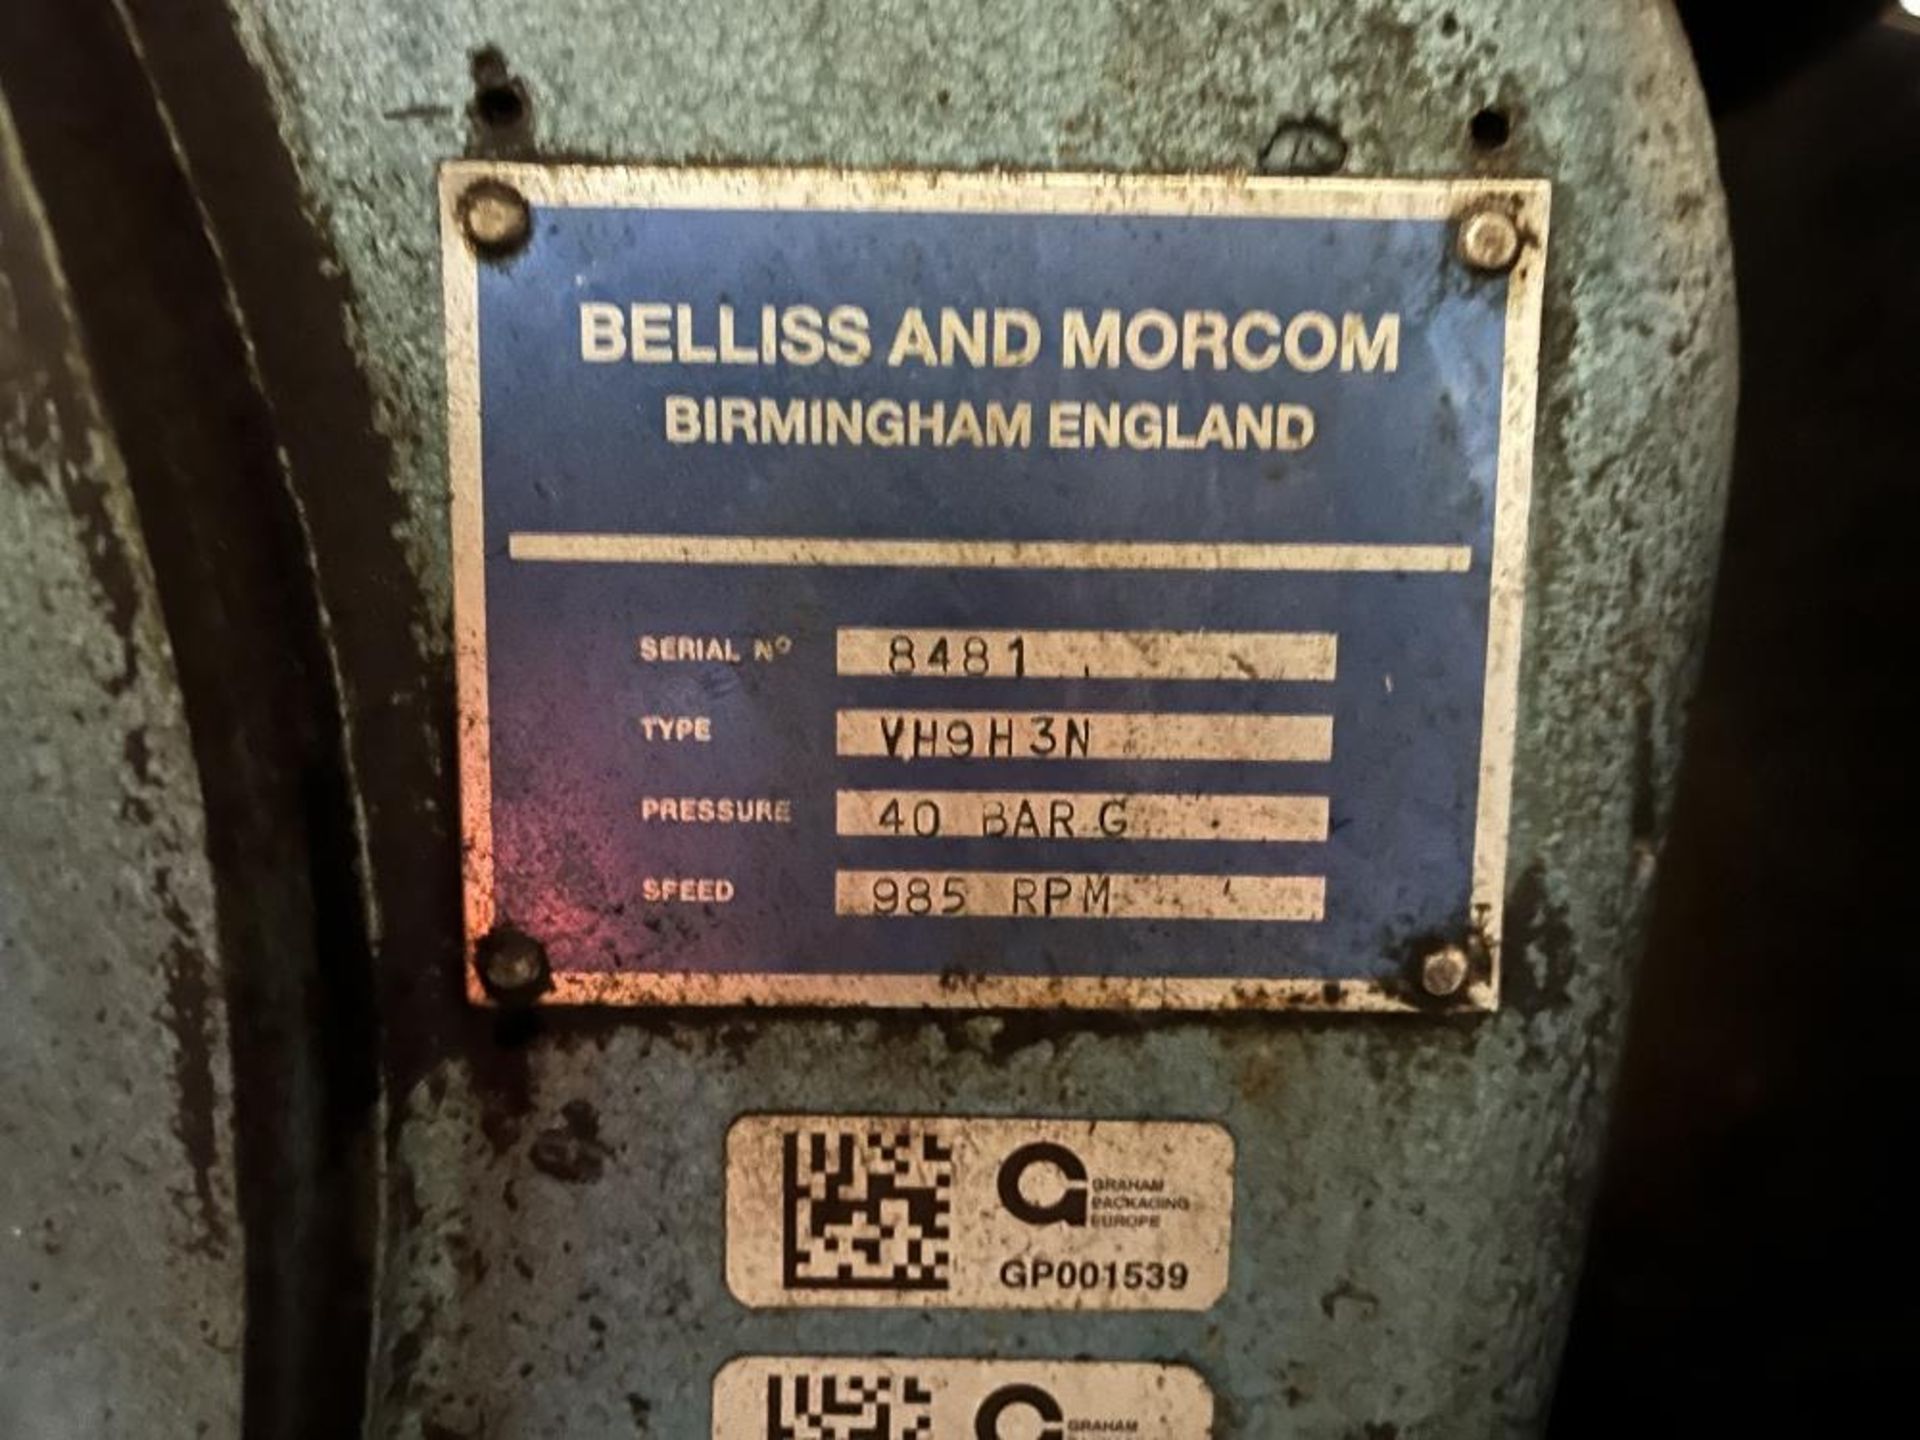 Belliss & Morcom Type VH9H3N twin head rotary compressor - Image 4 of 8